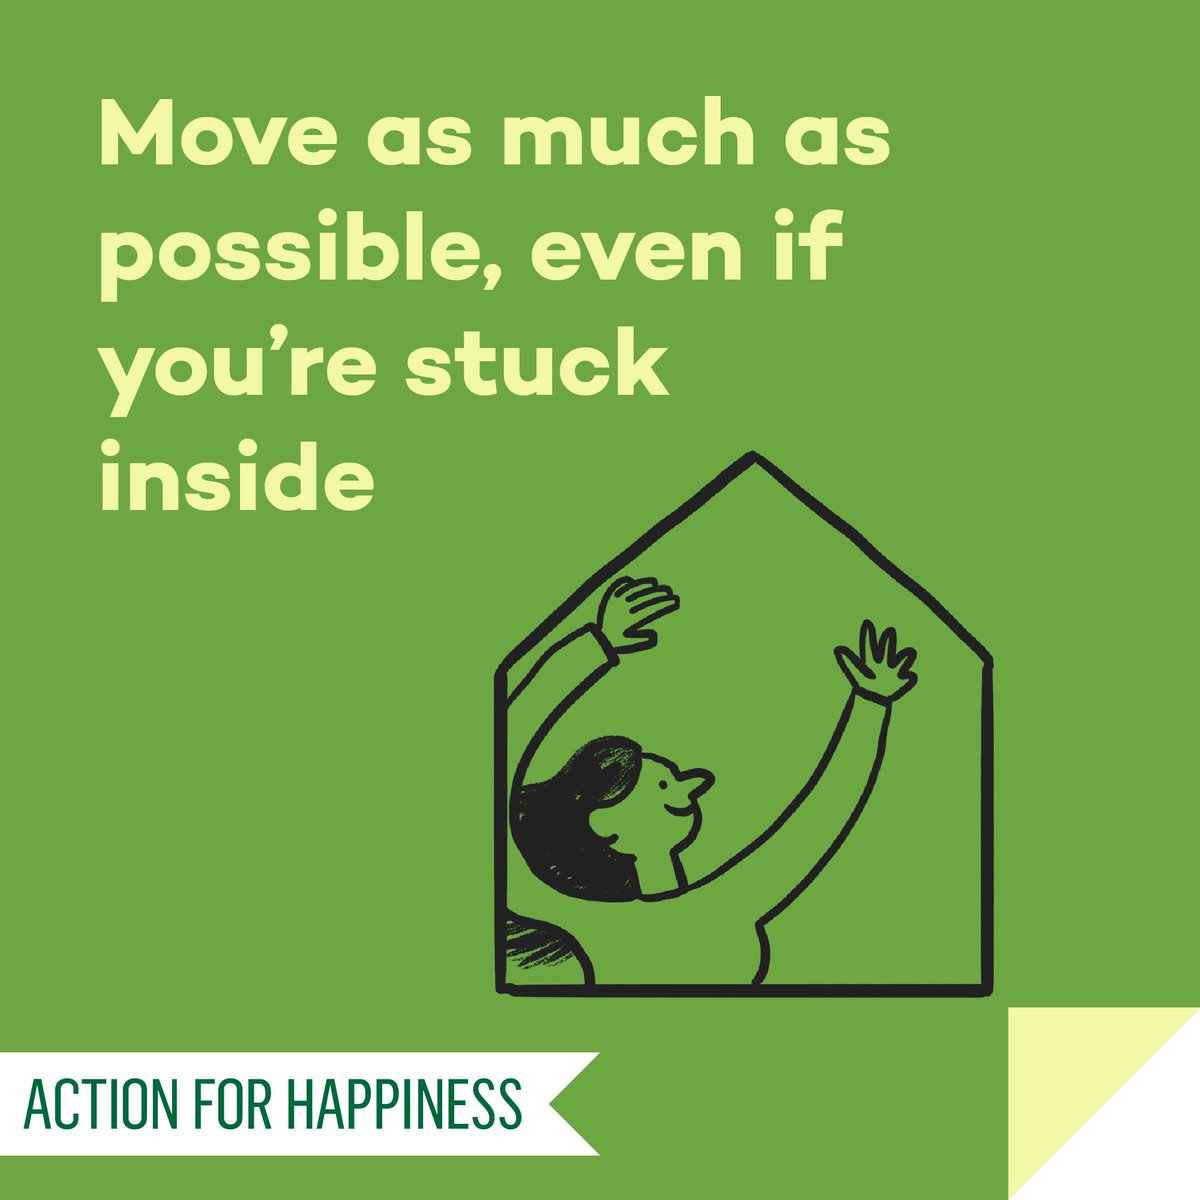 Active April - Day 12: Move as much as possible, even if you’re stuck inside actionforhappiness.org/active-april #ActiveApril